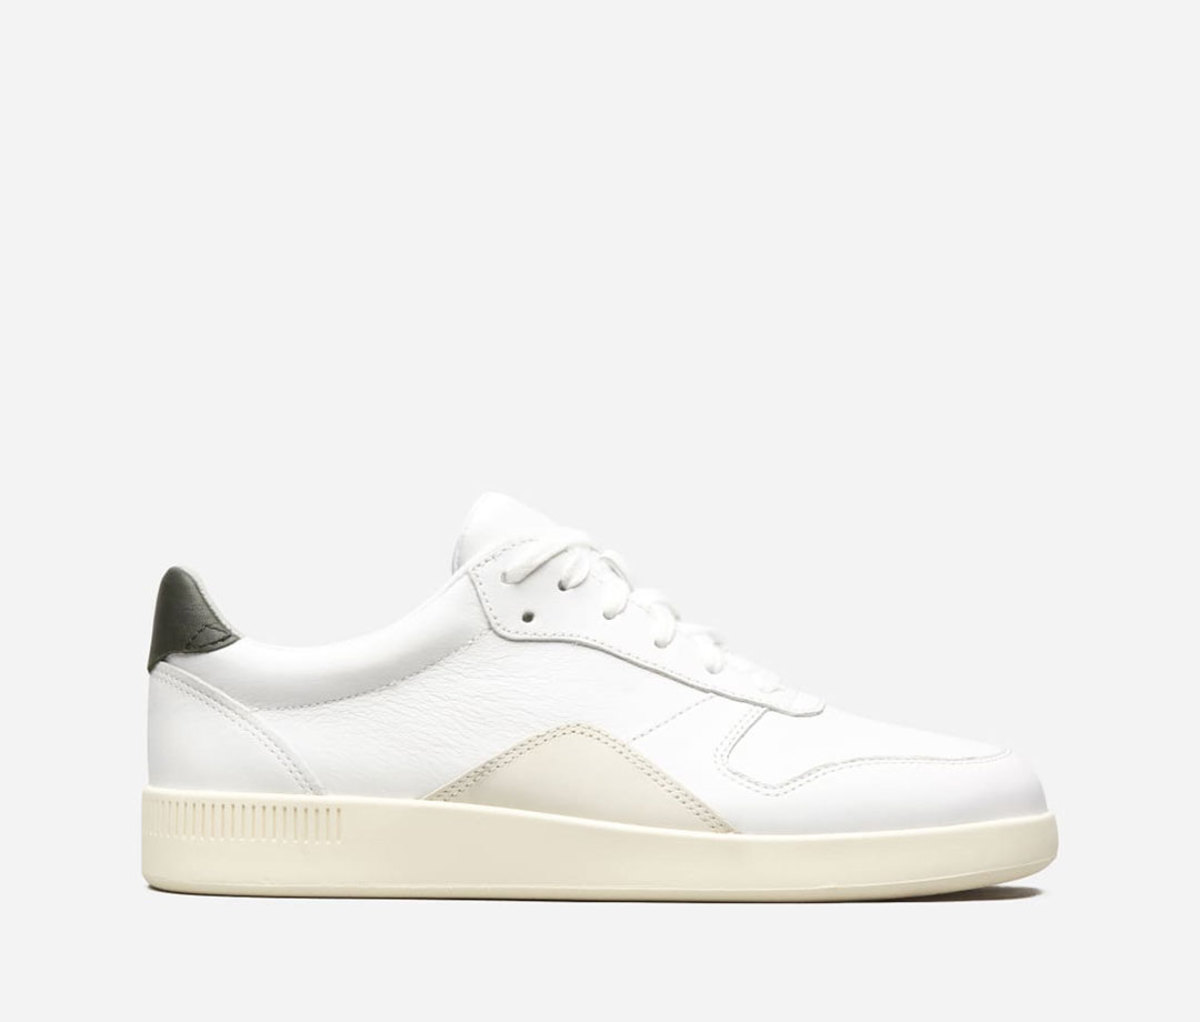 Interconnect Greenland salute Everlane's Court Sneaker Is the Best Leather Shoe for Spring